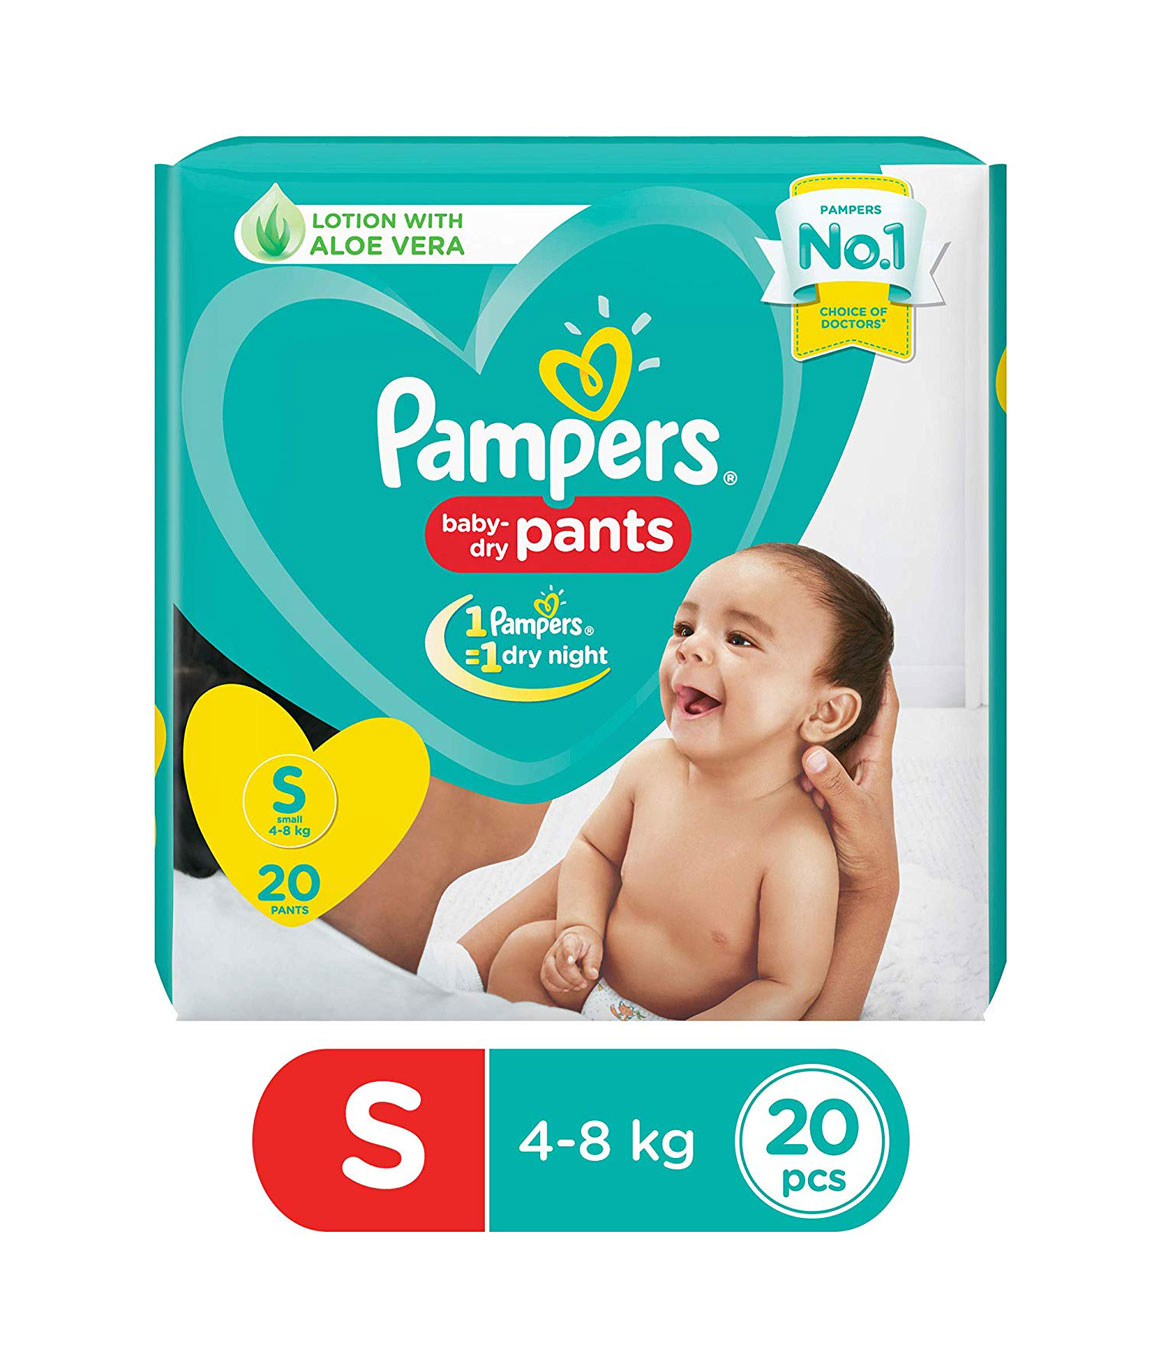 Pampers Pants Small Size Baby Diapers S 30 Count Lotion Ultra Soft Aloe Vera